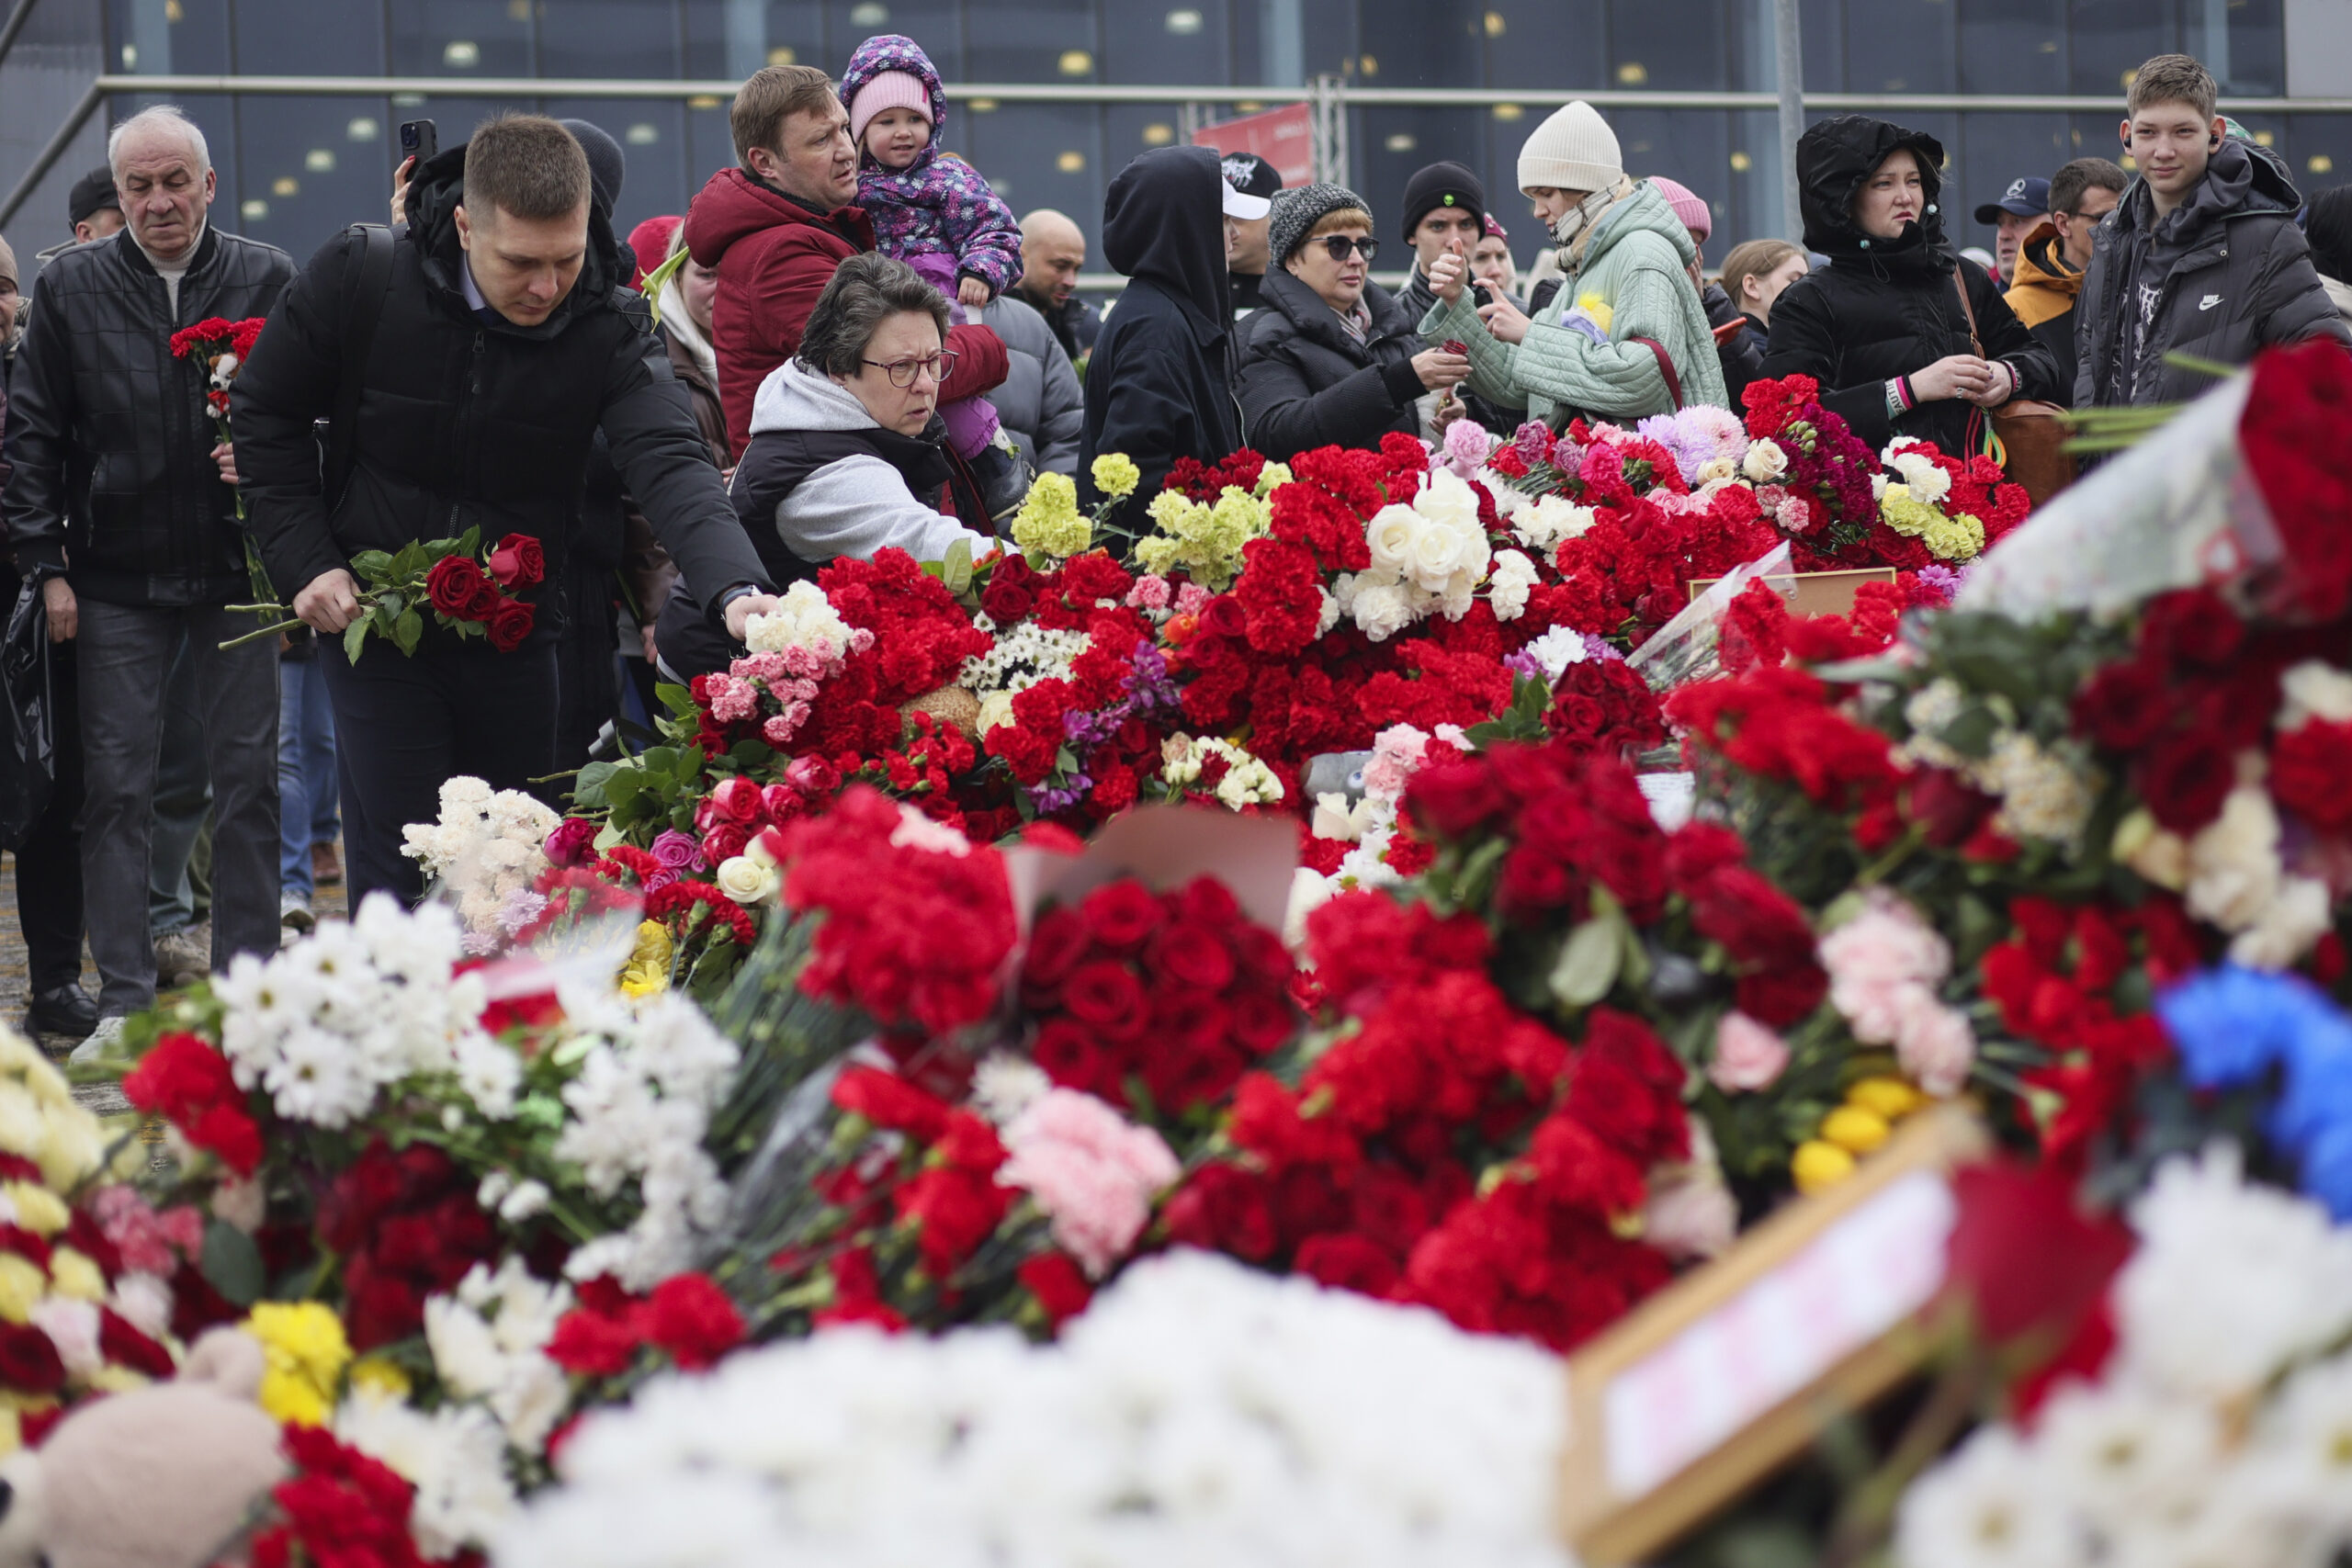 Russians Linking Moscow Concert Hall Attack To Ukraine Are ‘Manure Salesmen,’ Says US